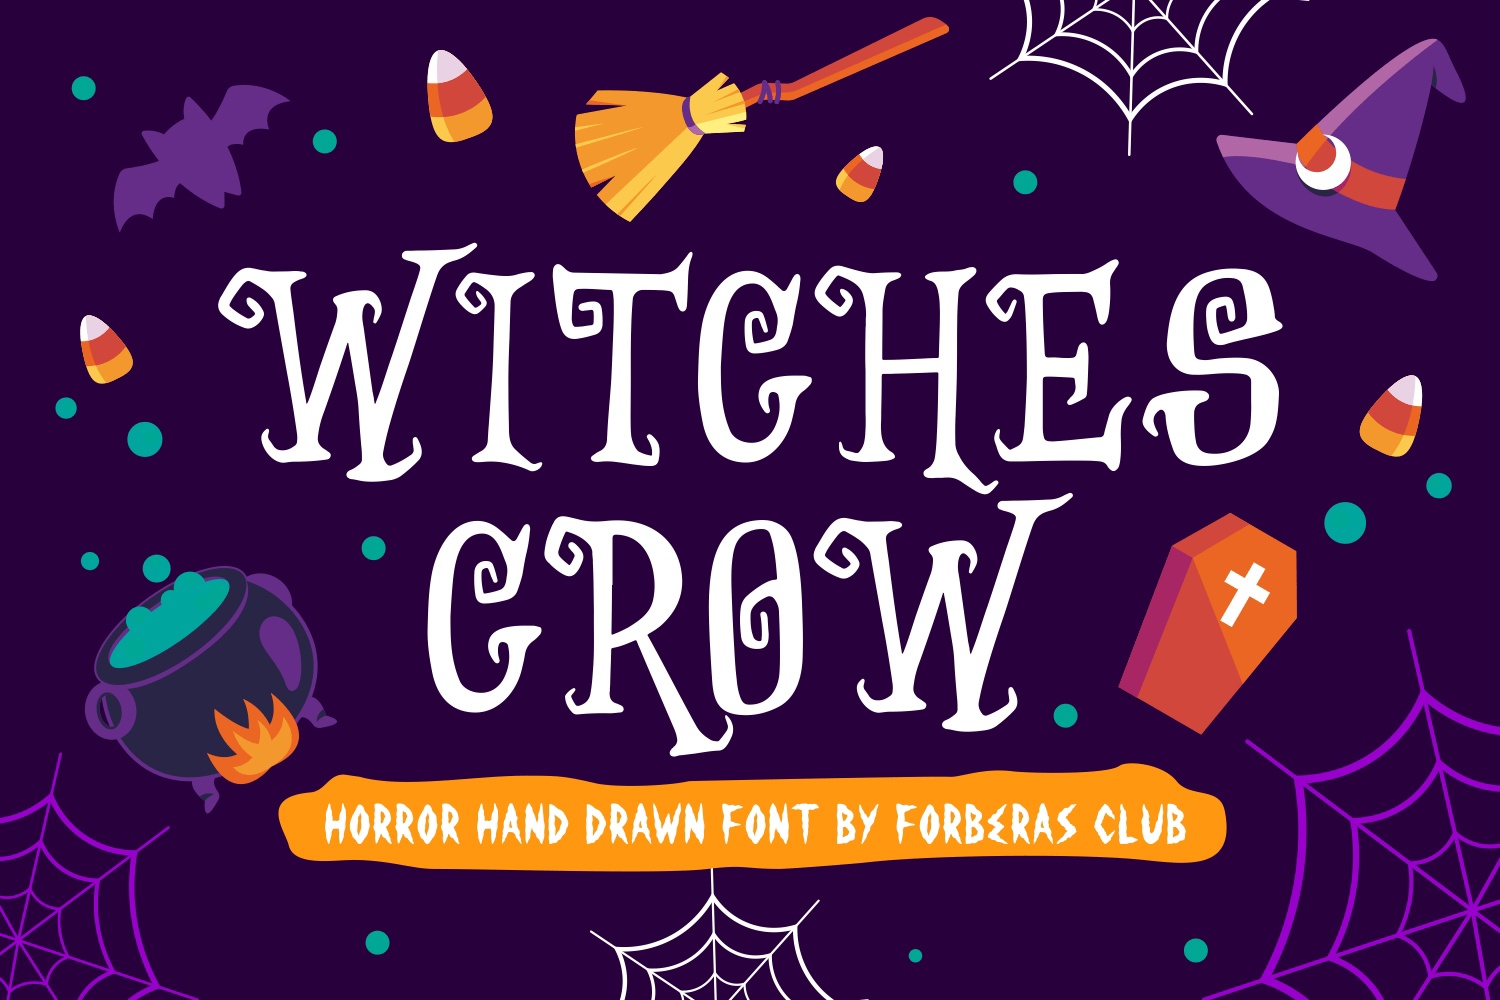 Witches Crow